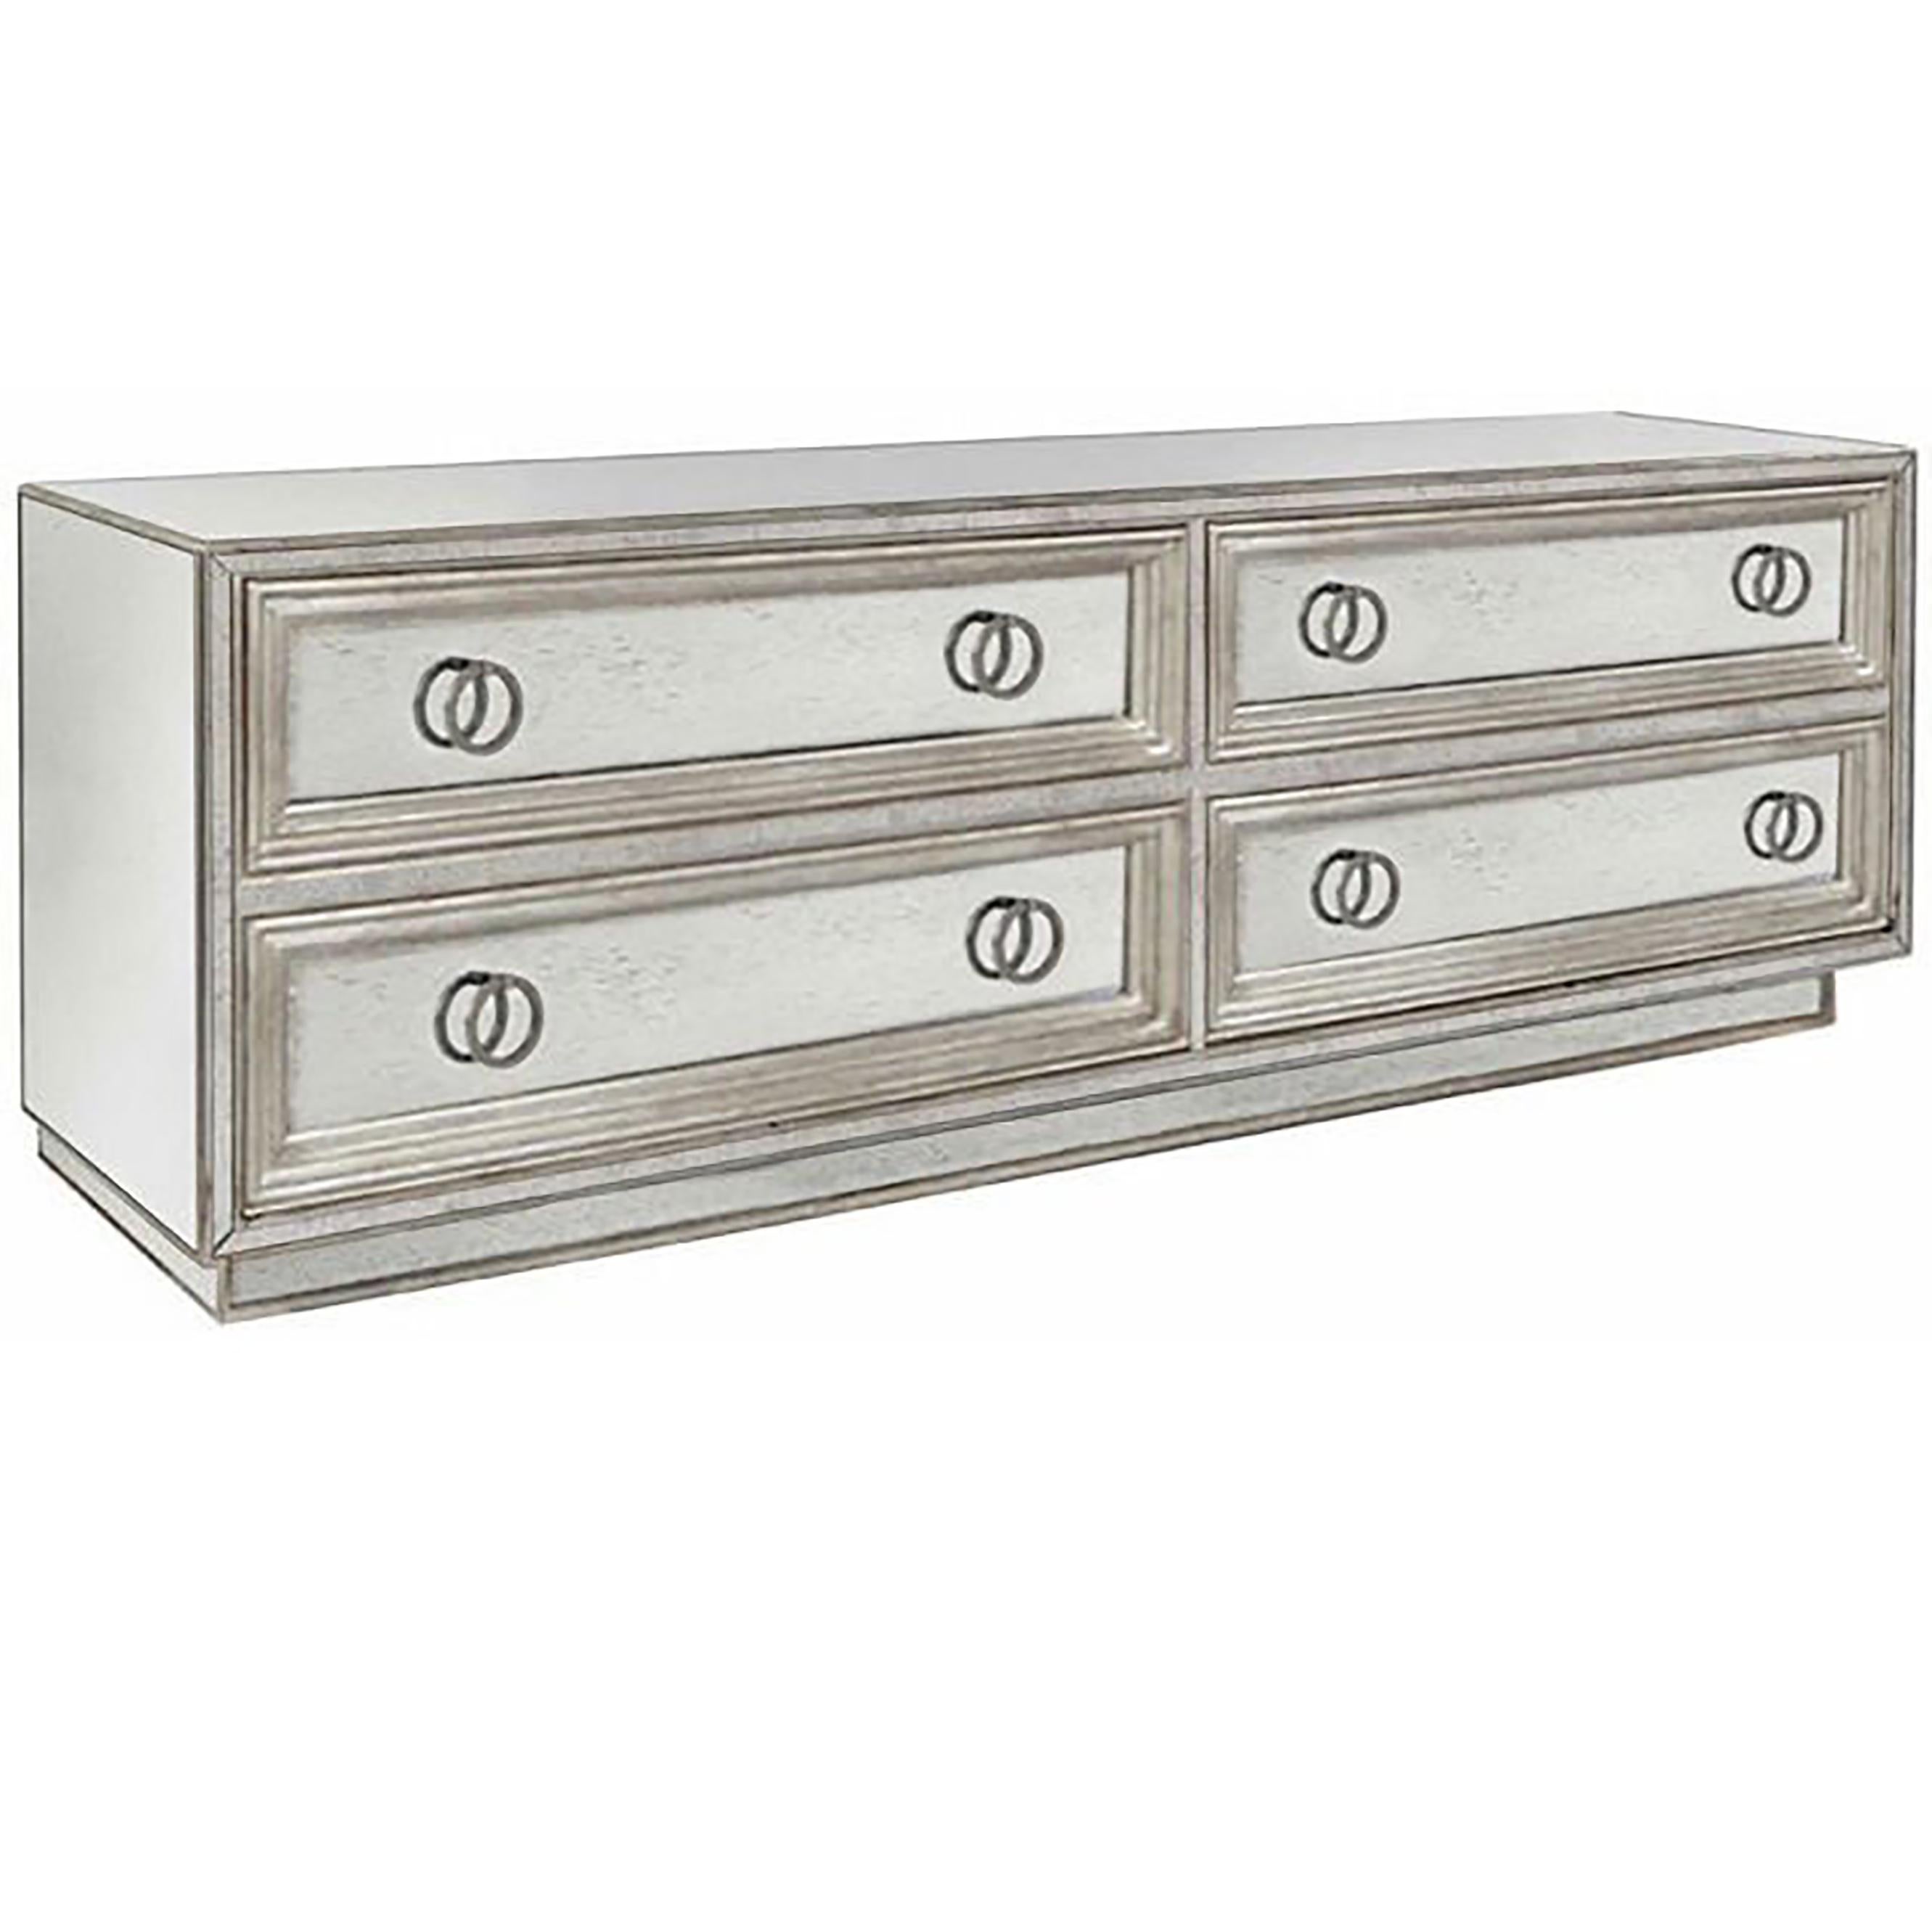 Four Drawer Mirror and Silver Leaf Dresser In Excellent Condition For Sale In New York, NY